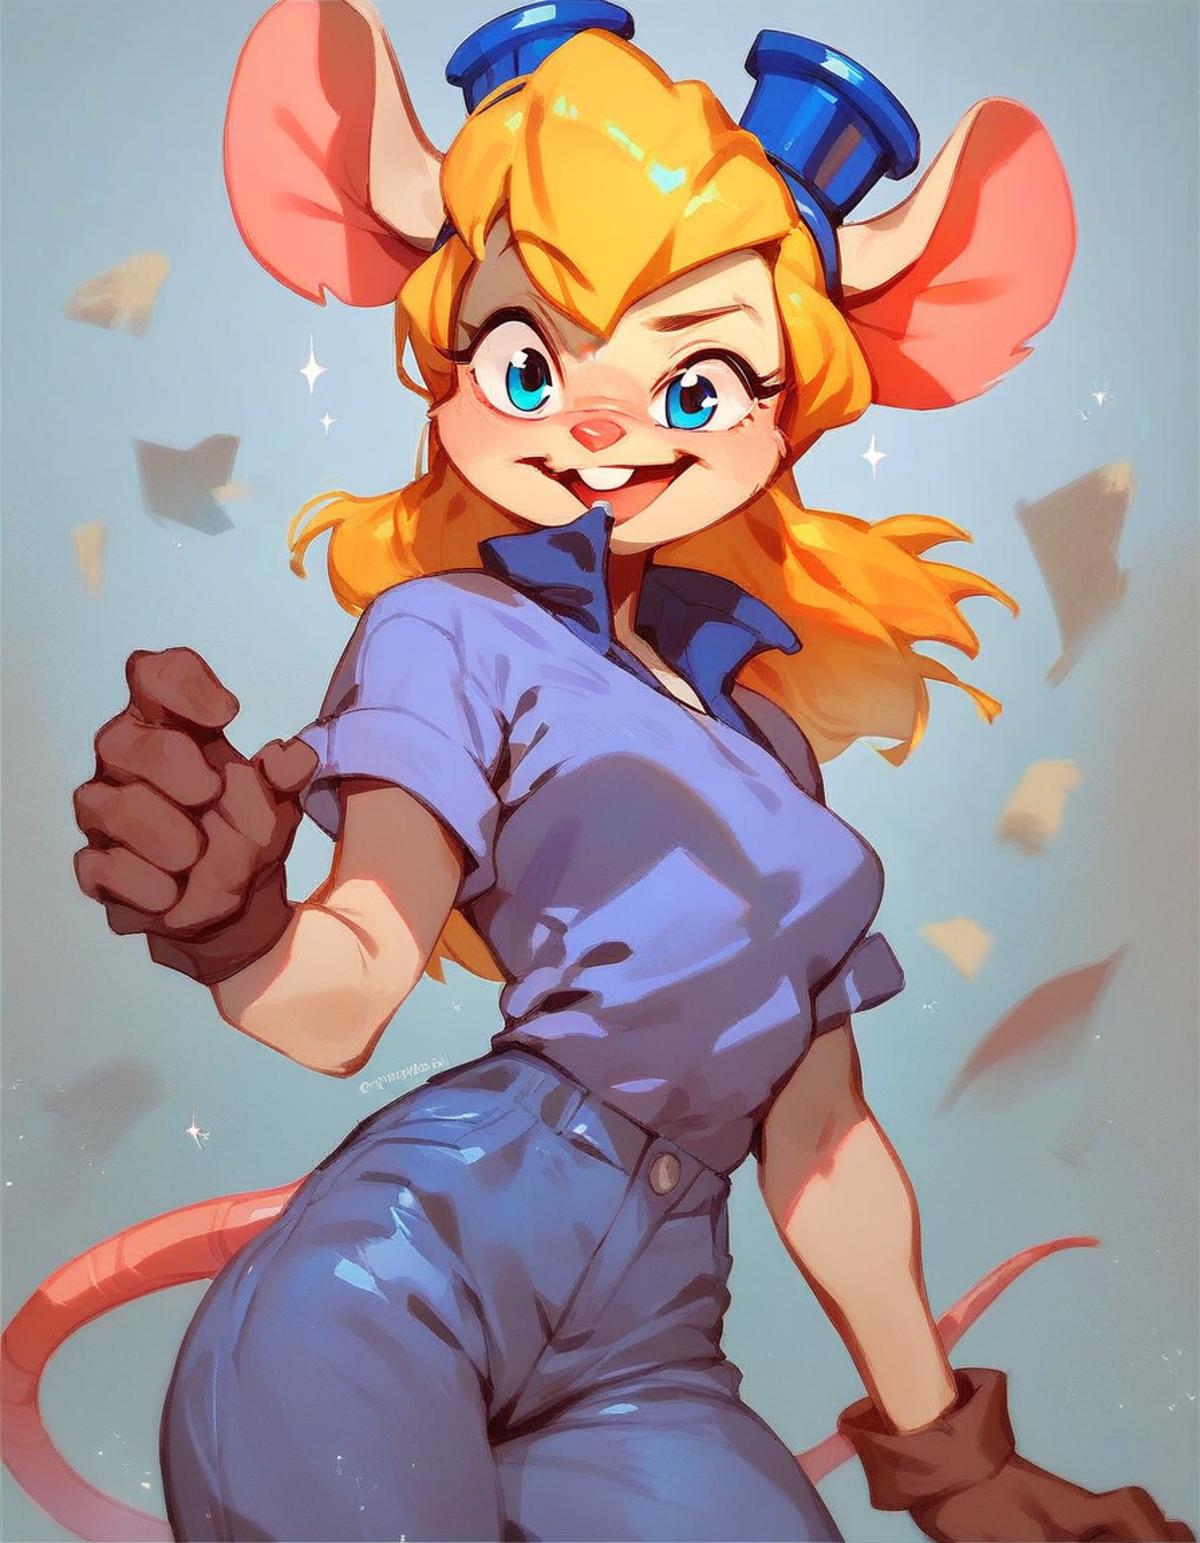 score_9, score_8_up, score_7_up, score_6_up, score_5_up, score_4_up, anthro mouse gadget hackwrench, blonde hair